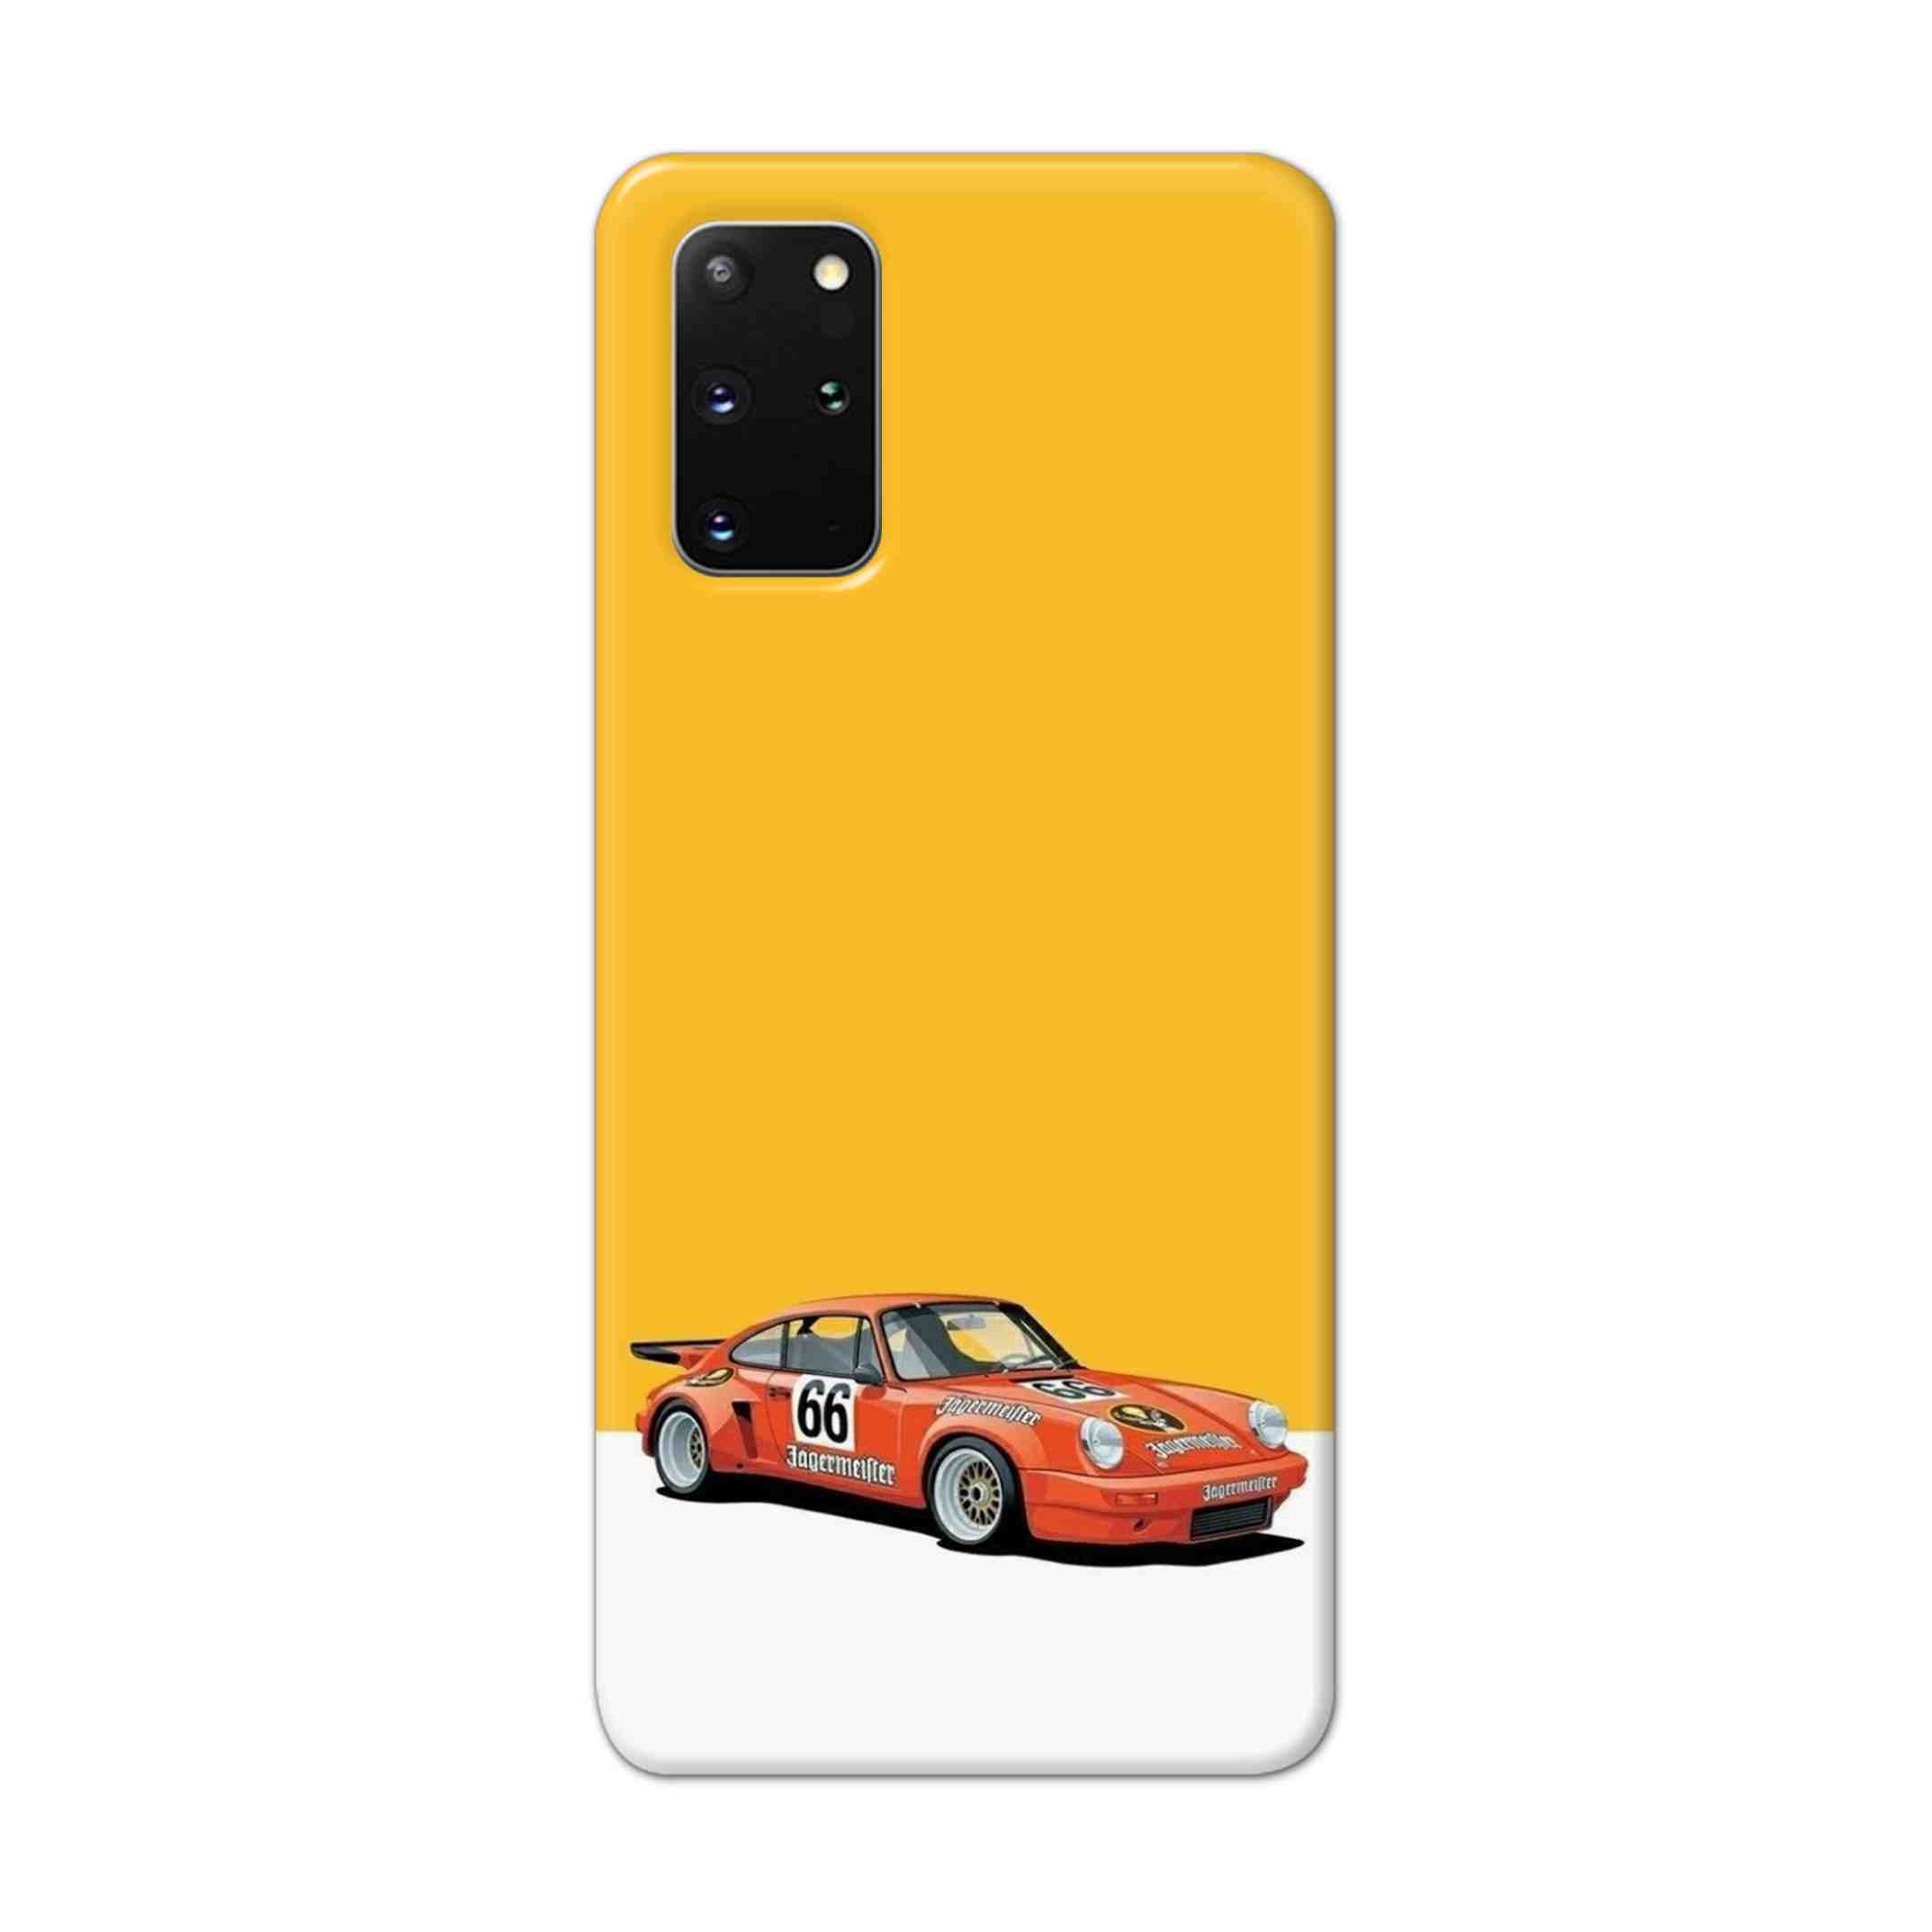 Buy Porche Hard Back Mobile Phone Case Cover For Samsung Galaxy S20 Plus Online